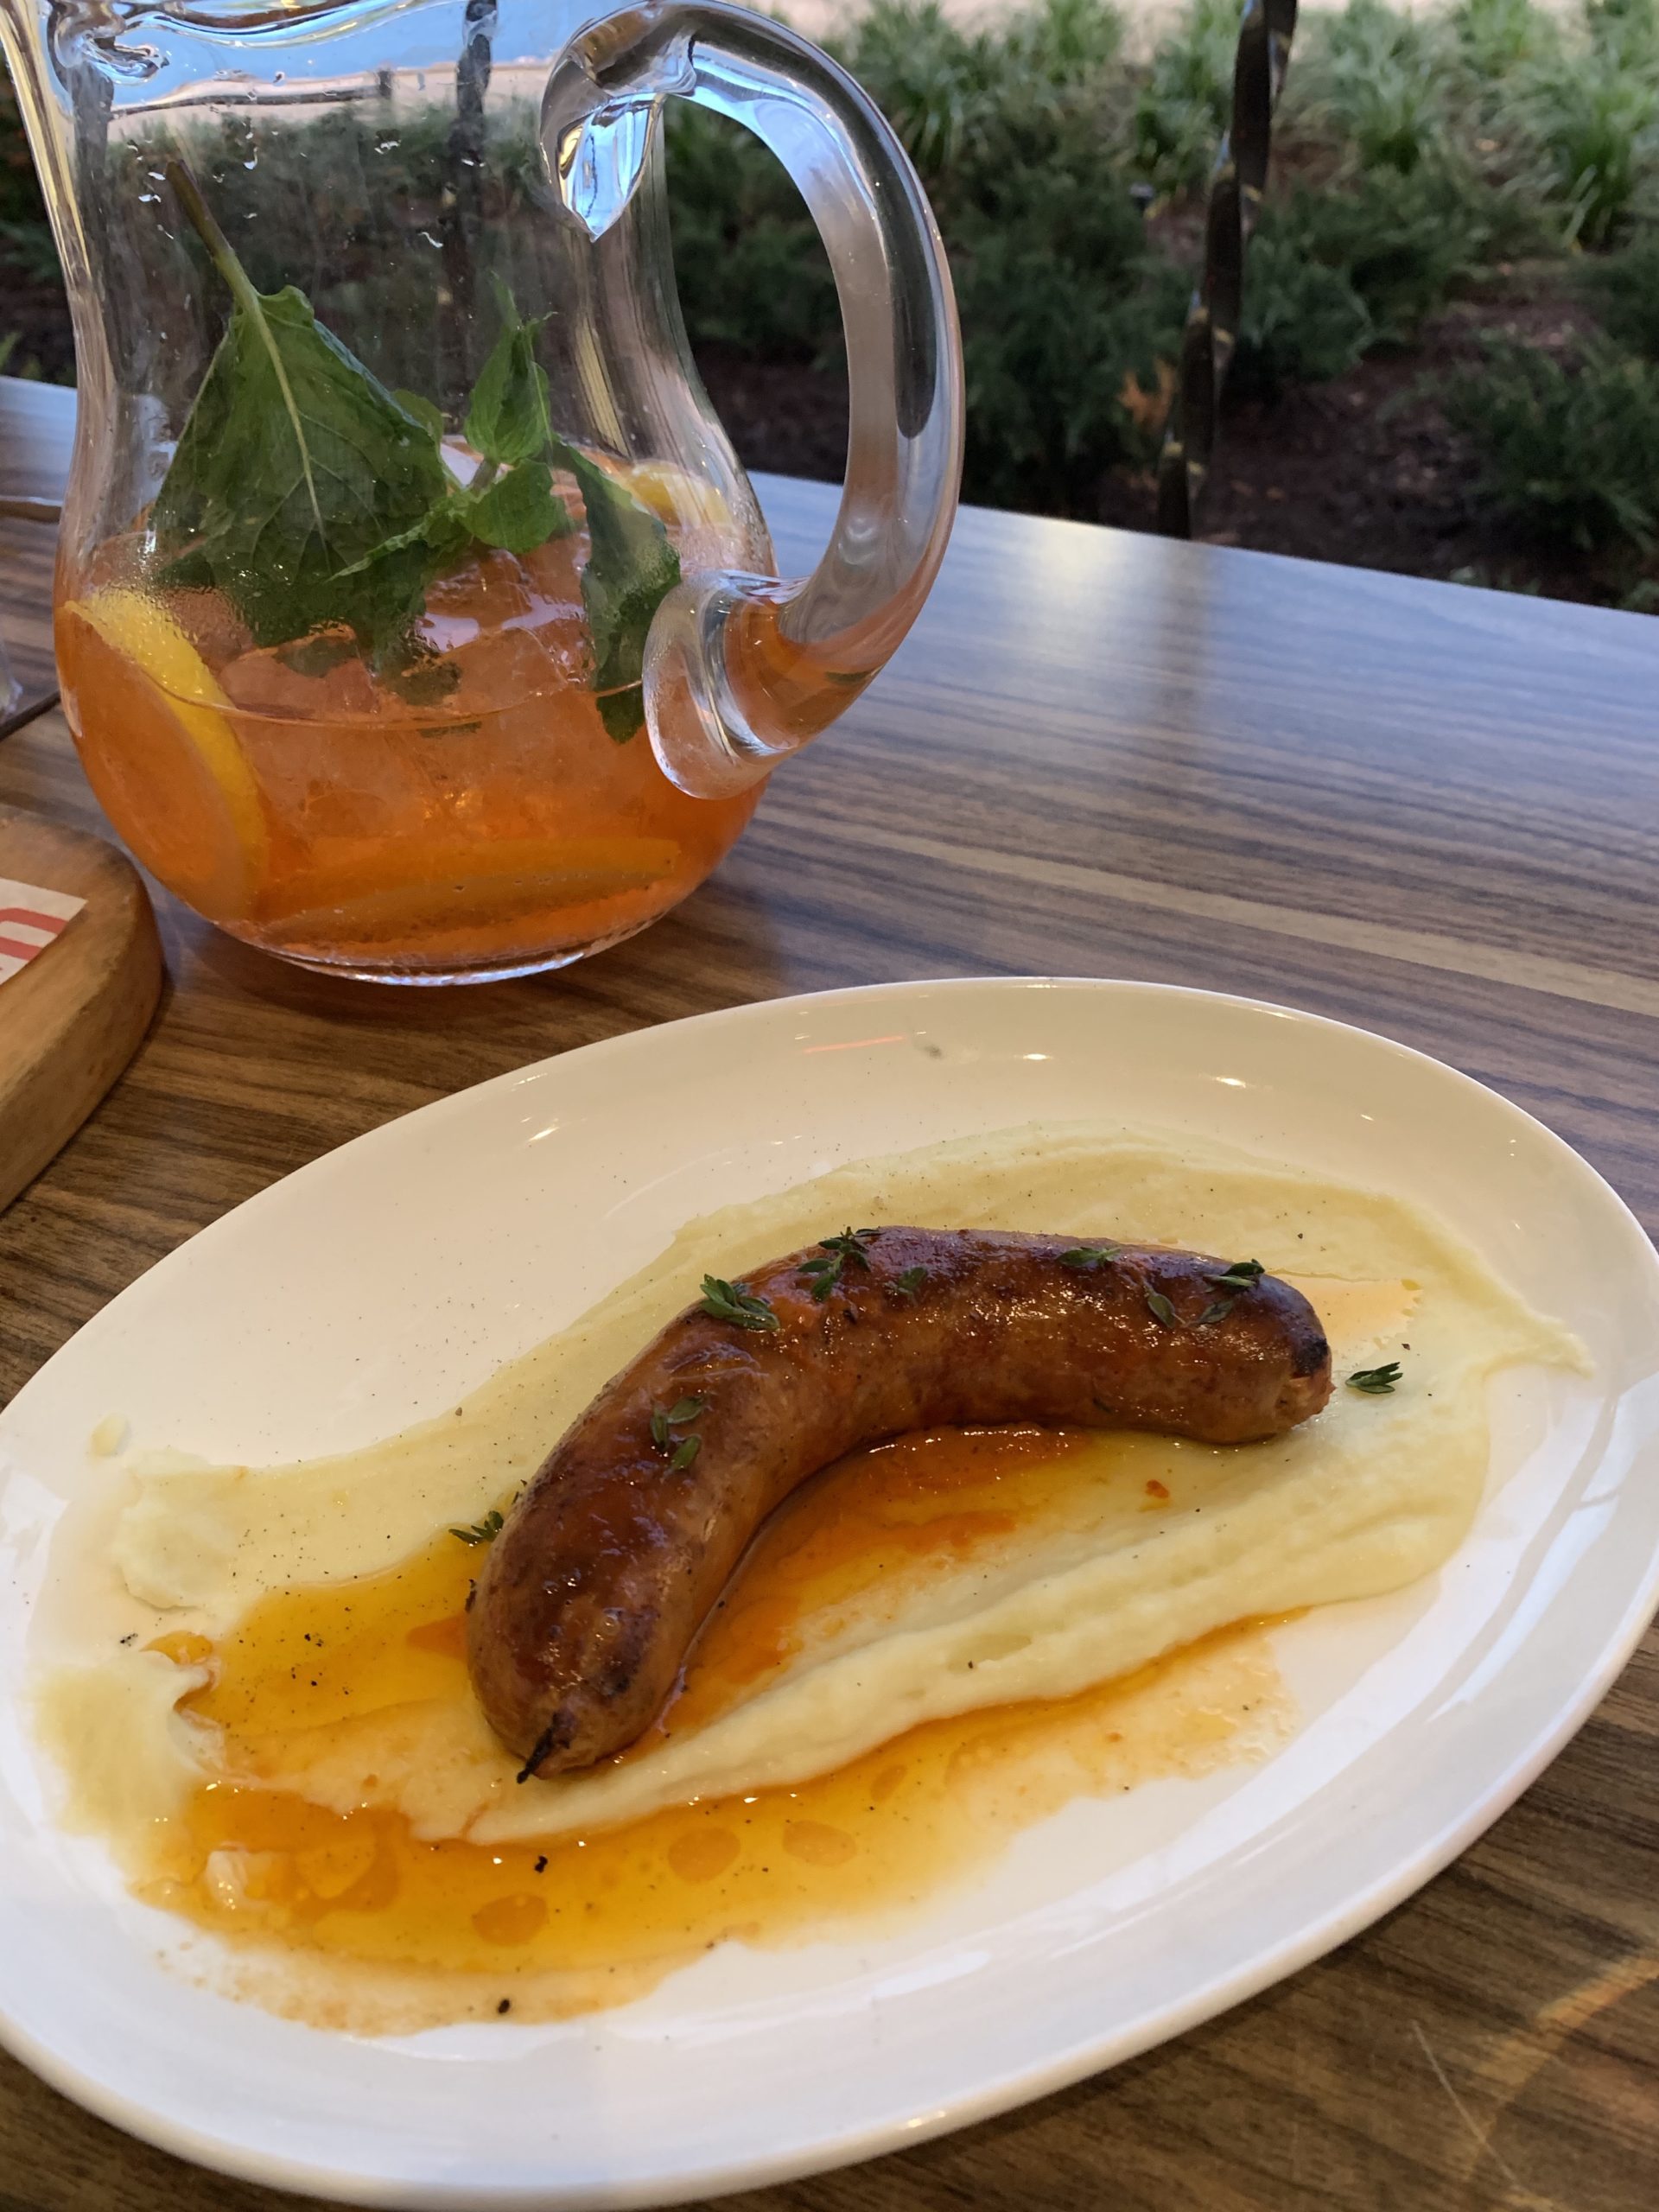 a sausage on a plate with mashed potatoes and a drink